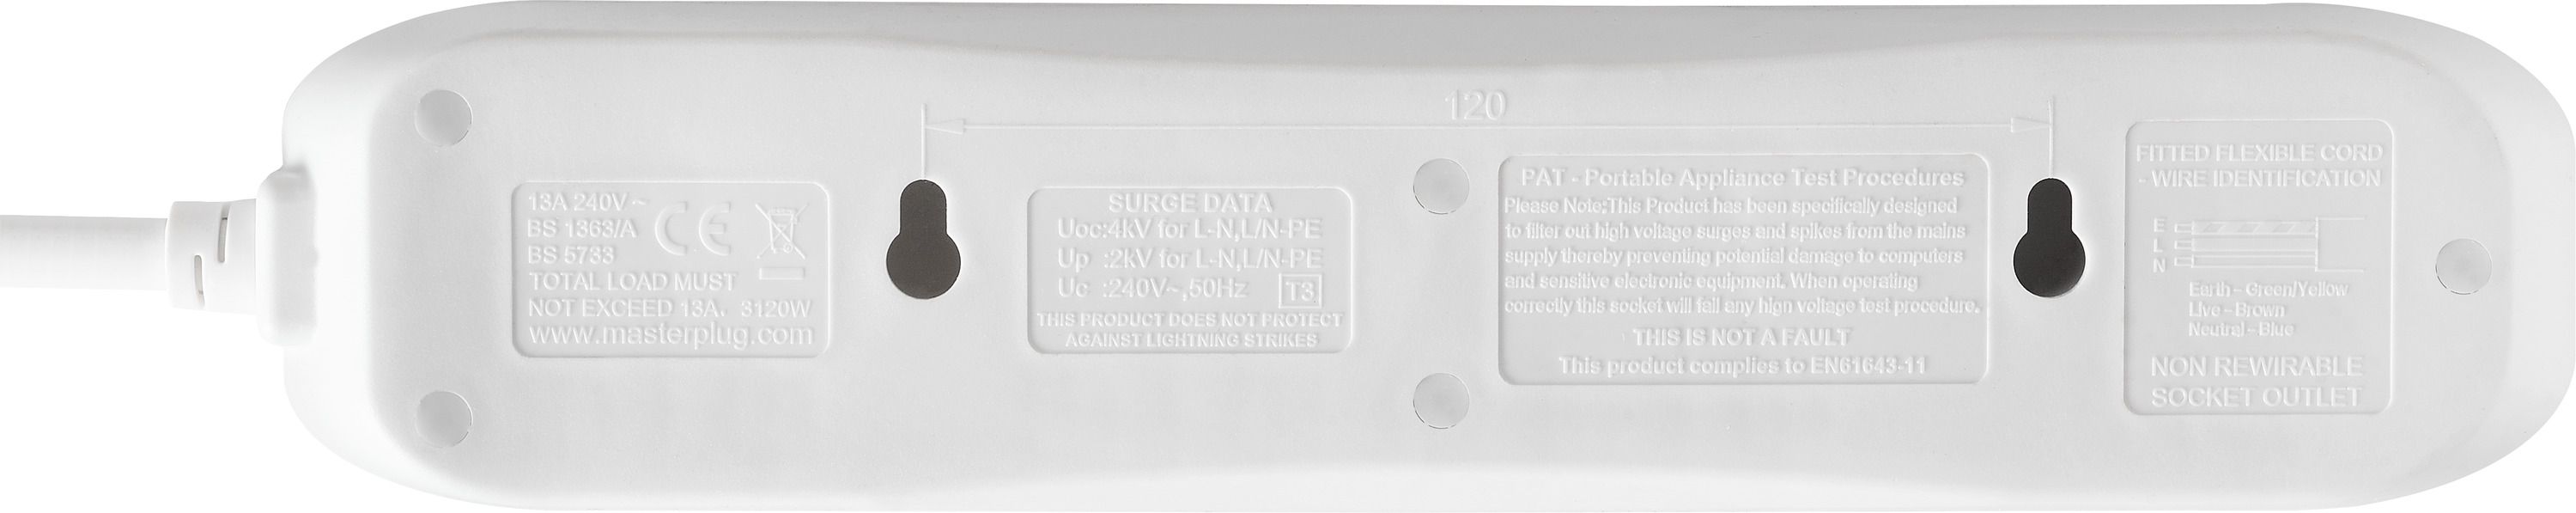 Masterplug SRG48N-BD 4 socket 13A Surge protected White Extension lead, 8m